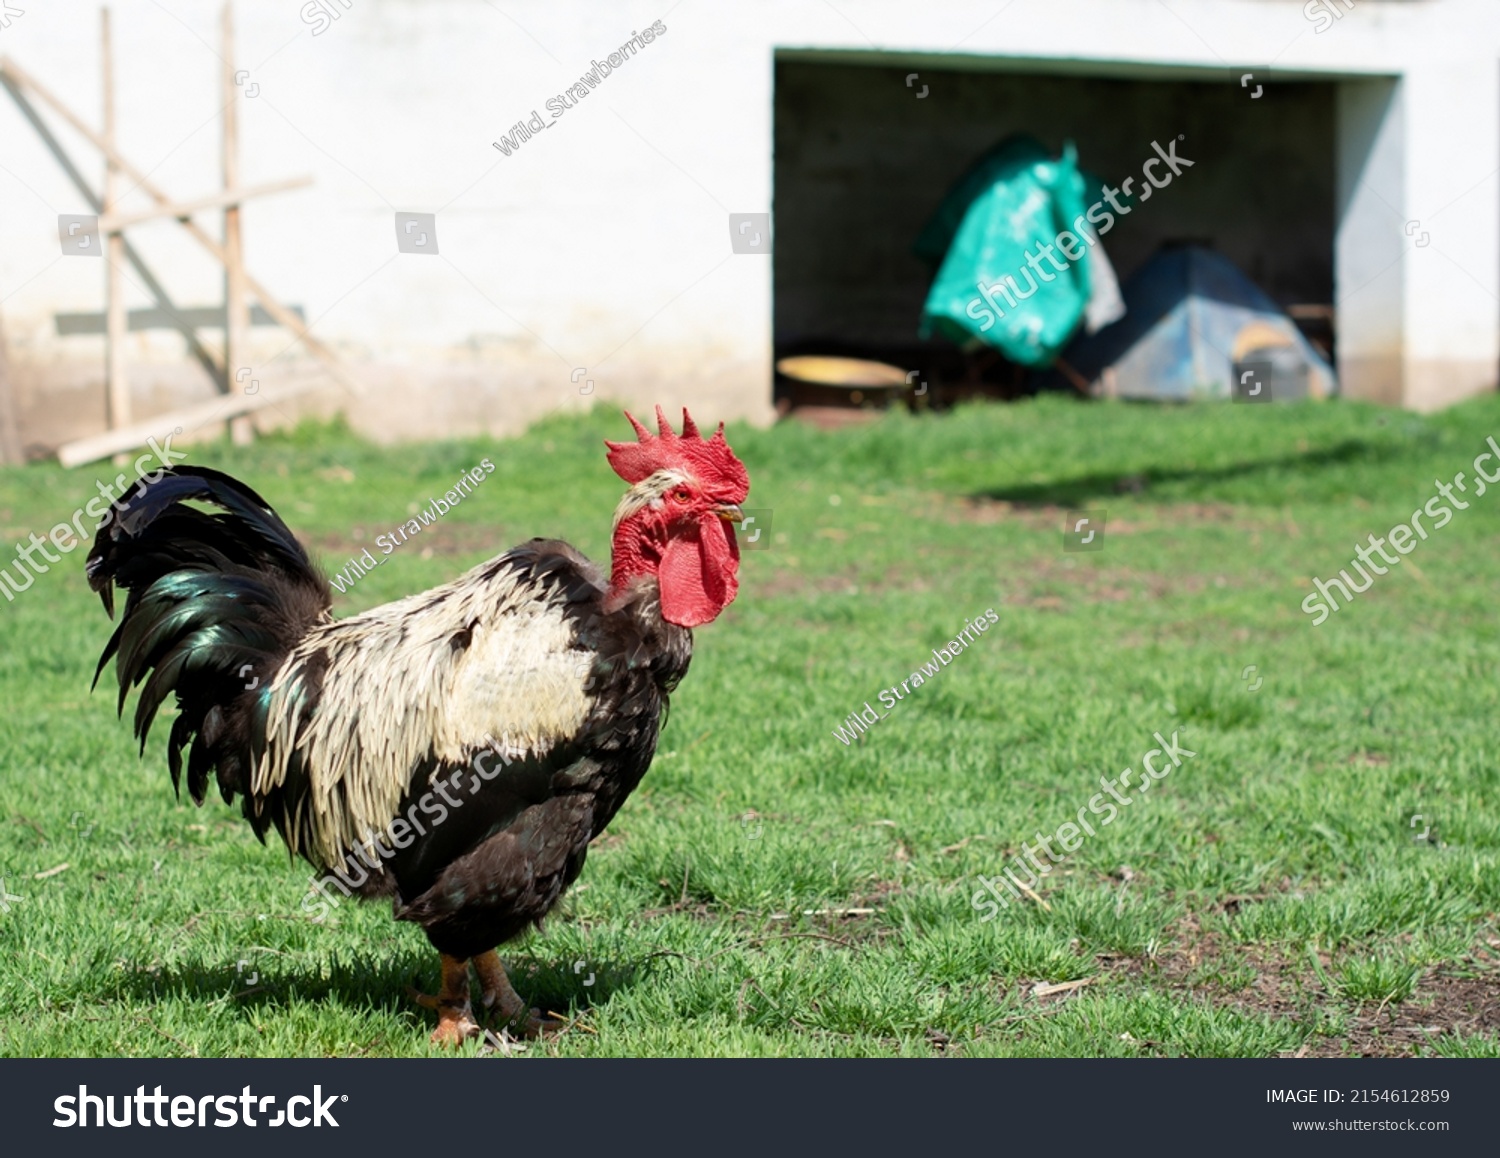 Old Banat Naked Neck Rooster Standing Stock Photo 2154612859 Shutterstock